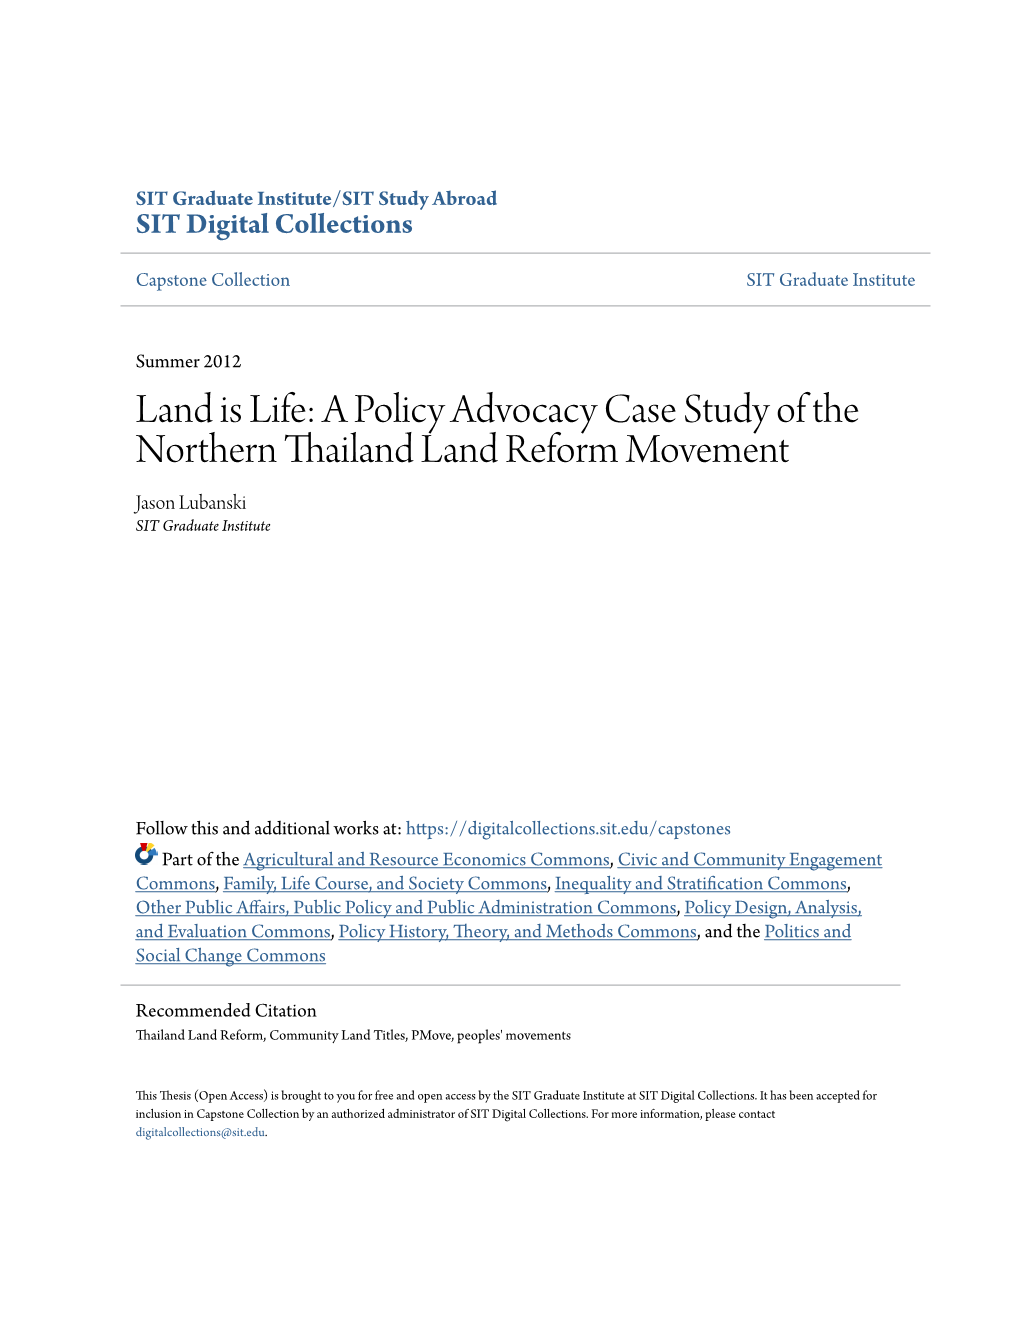 A Policy Advocacy Case Study of the Northern Thailand Land Reform Movement Jason Lubanski SIT Graduate Institute